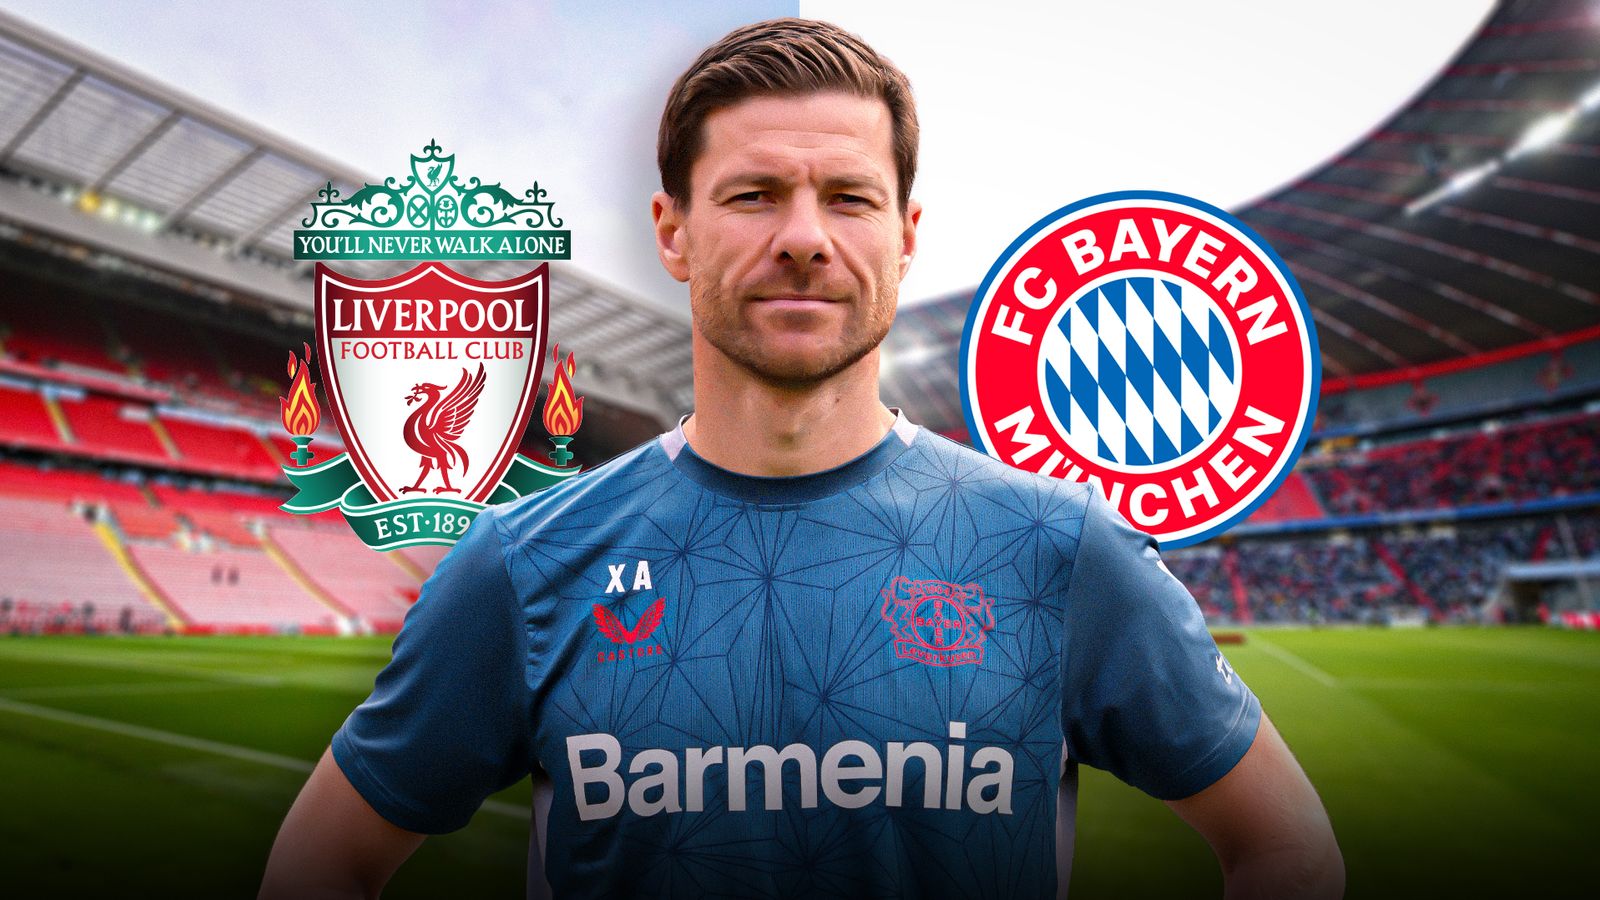 Xabi Alonso Likely to Remain with Bayer Leverkusen Despite Interest from Liverpool and Bayern Munich